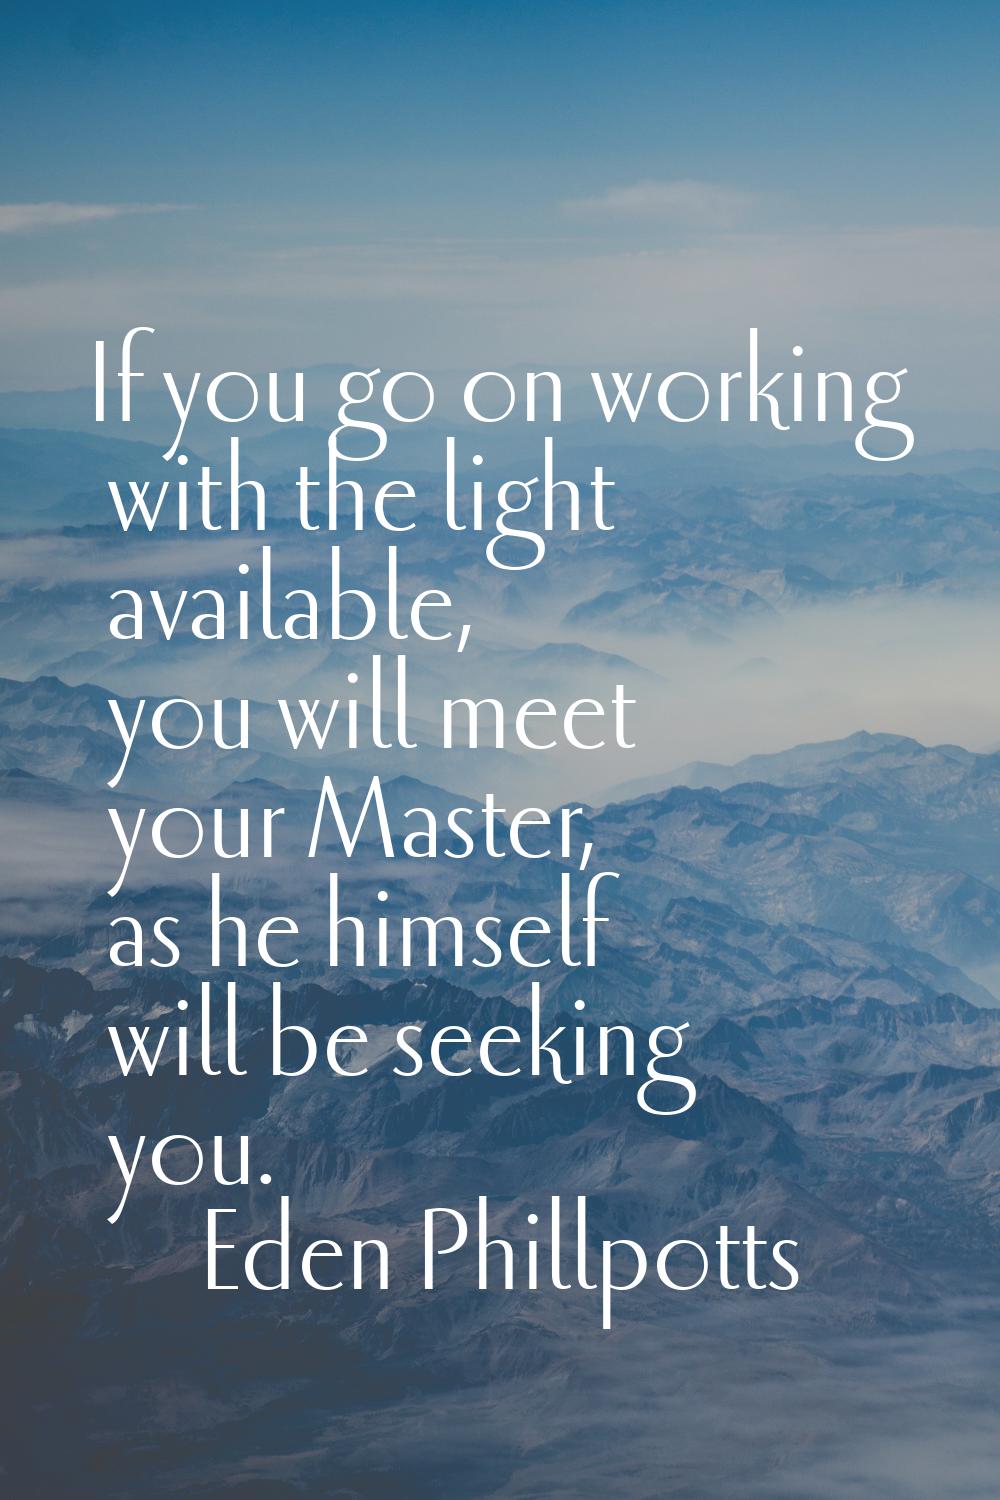 If you go on working with the light available, you will meet your Master, as he himself will be see